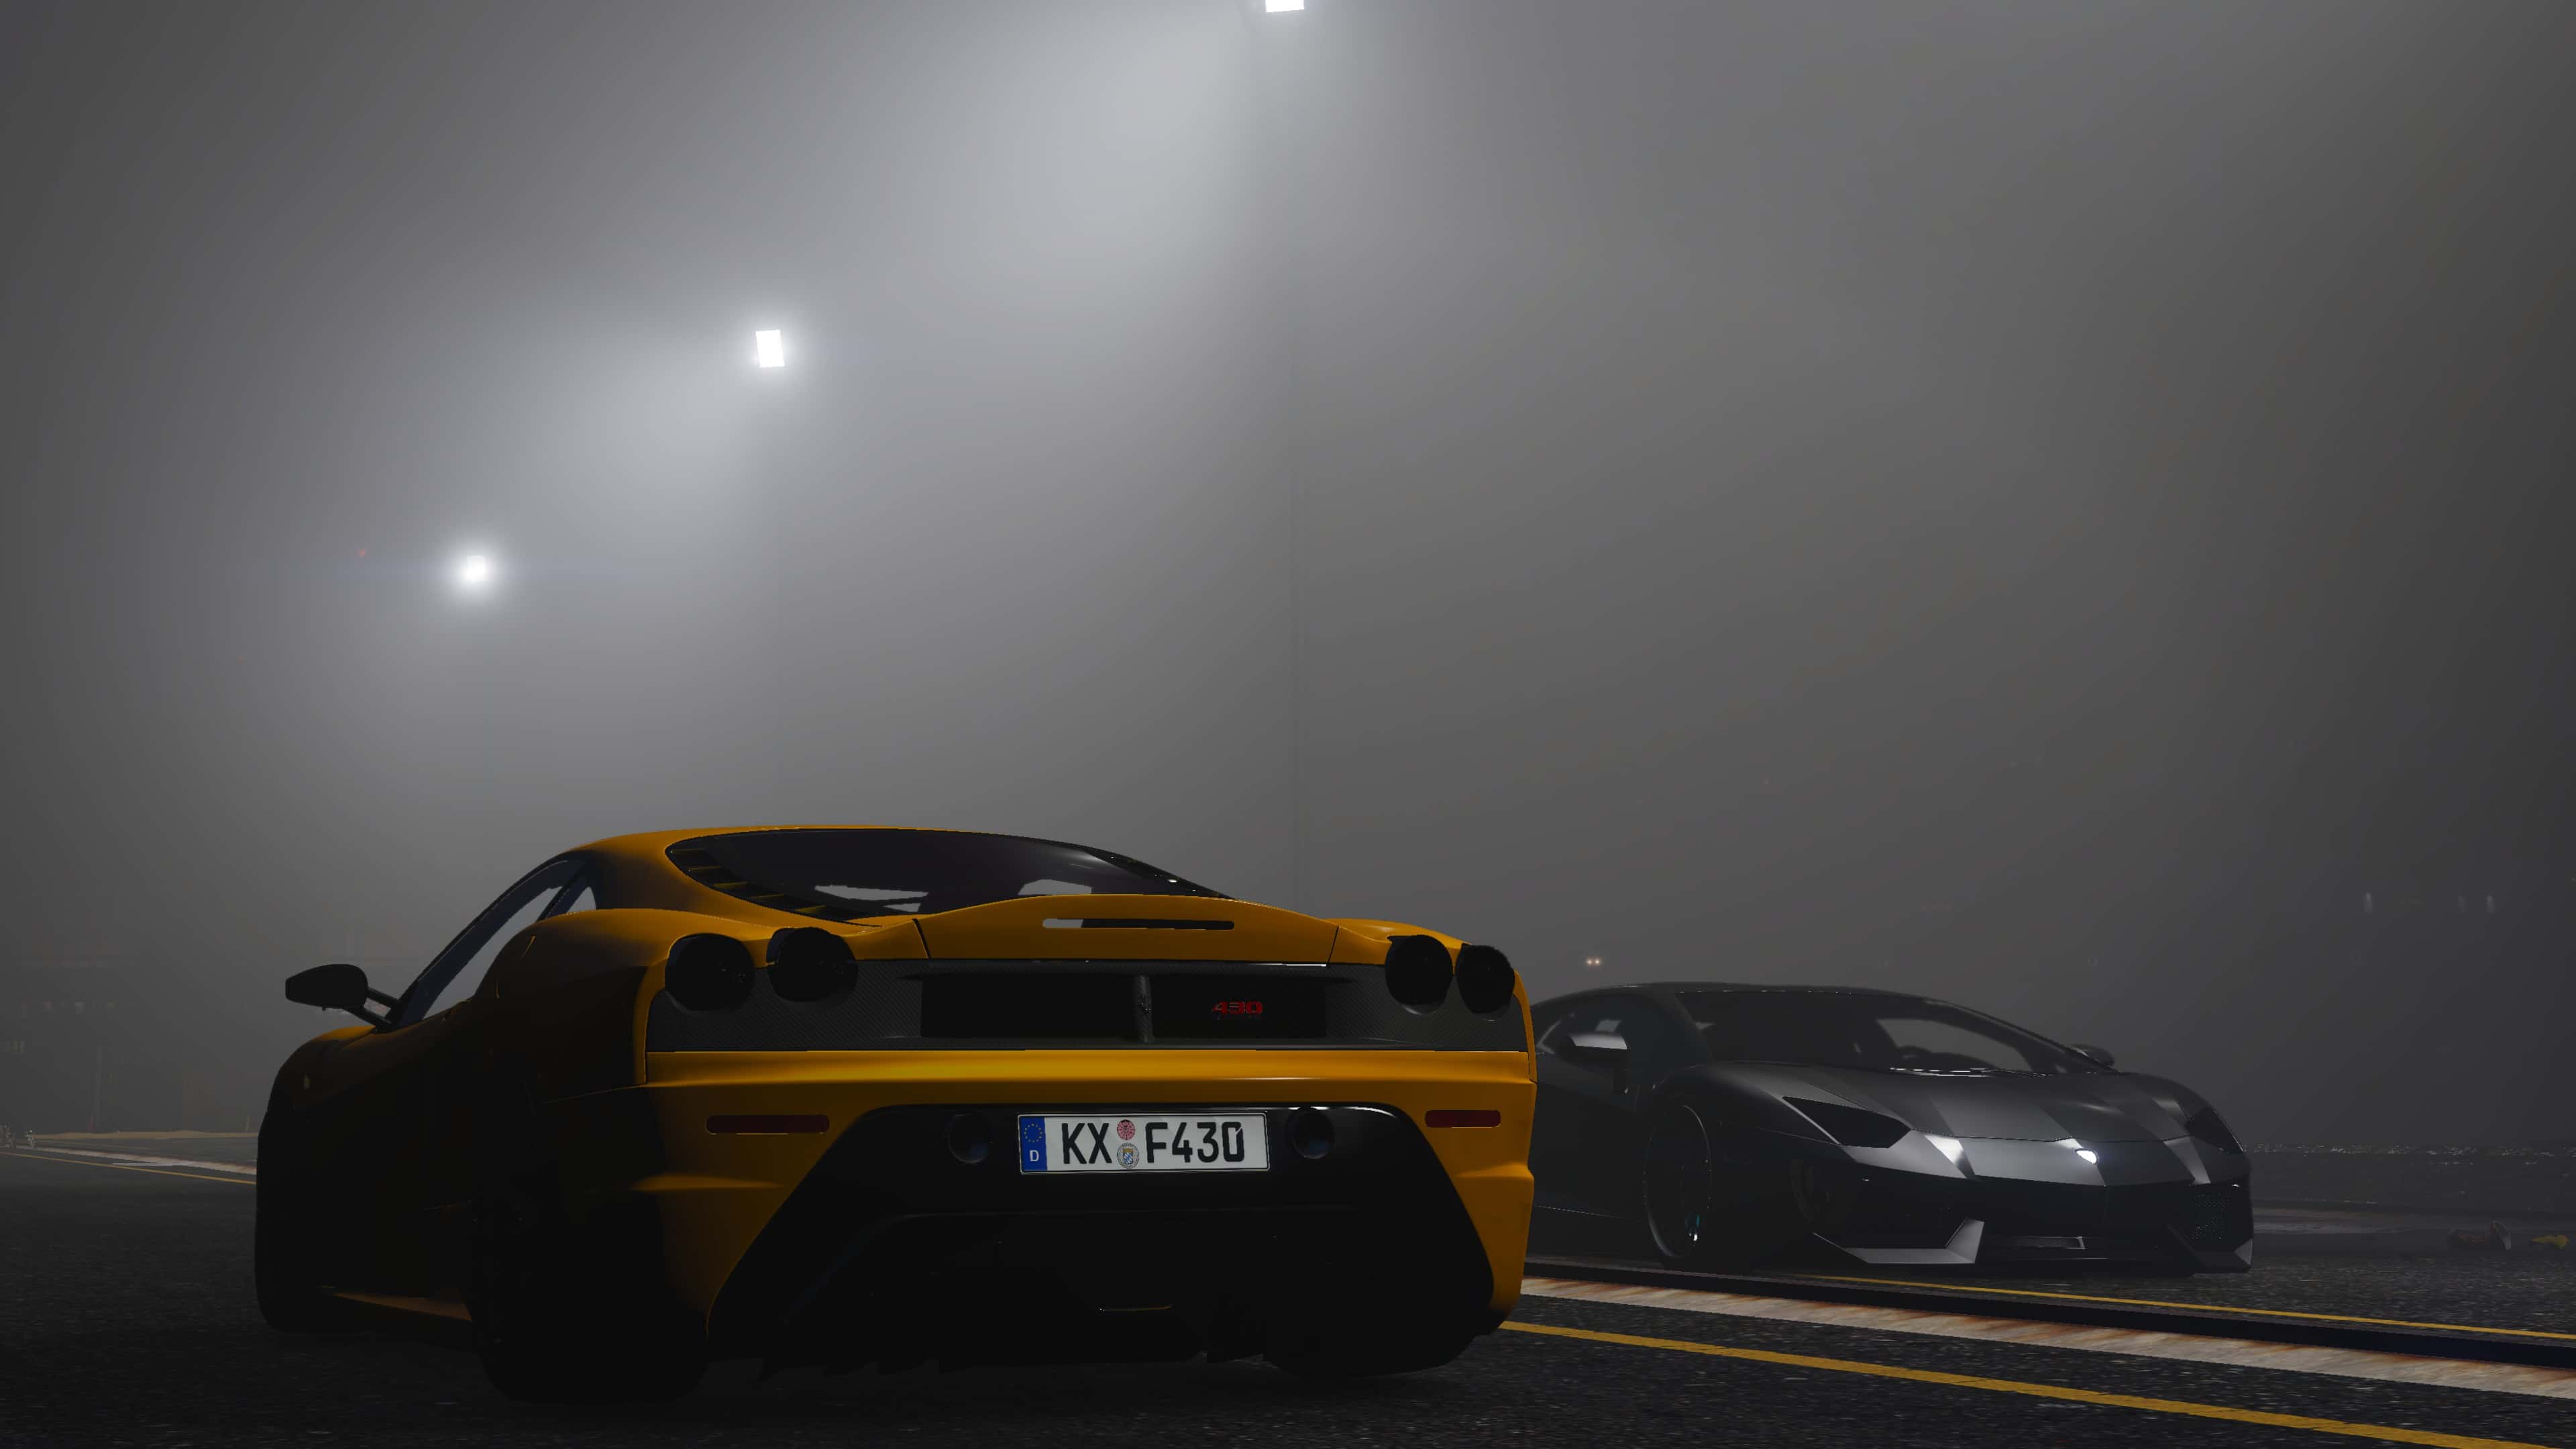 Gta 5 Supercars In Real Life